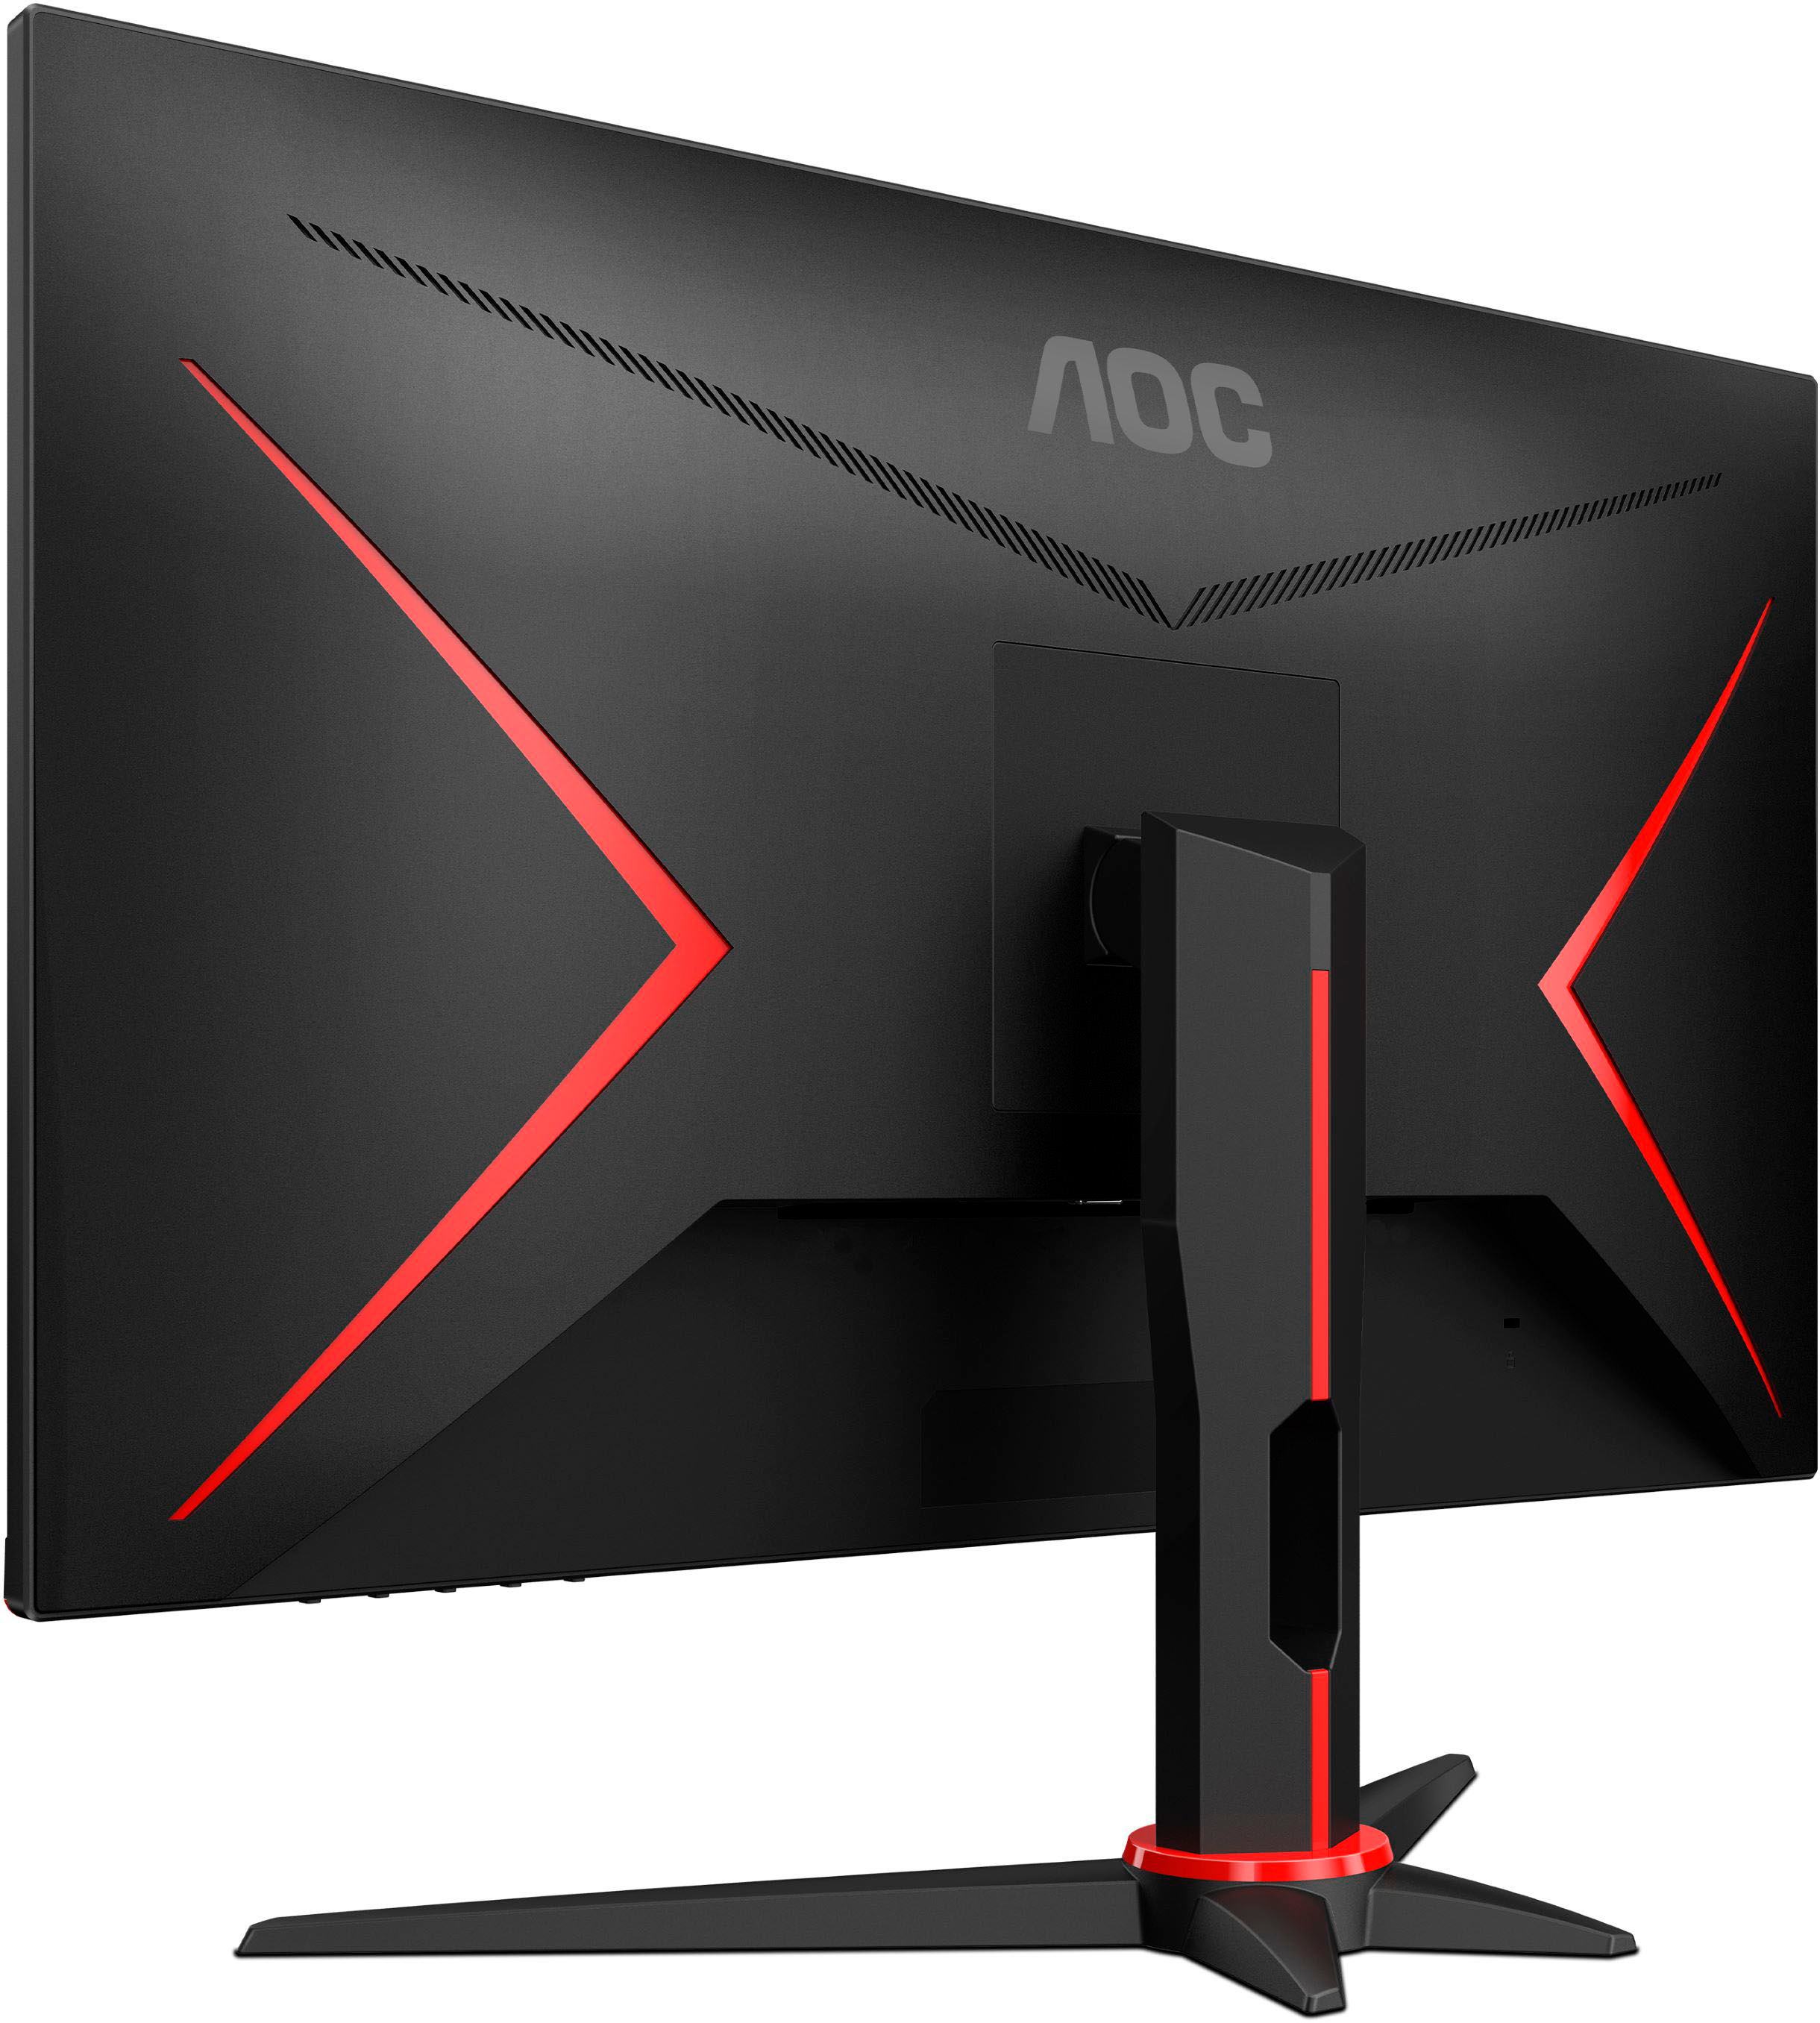 National Day Offer !!! Buy AOC 360Hz Gaming Monitor & Get FREE